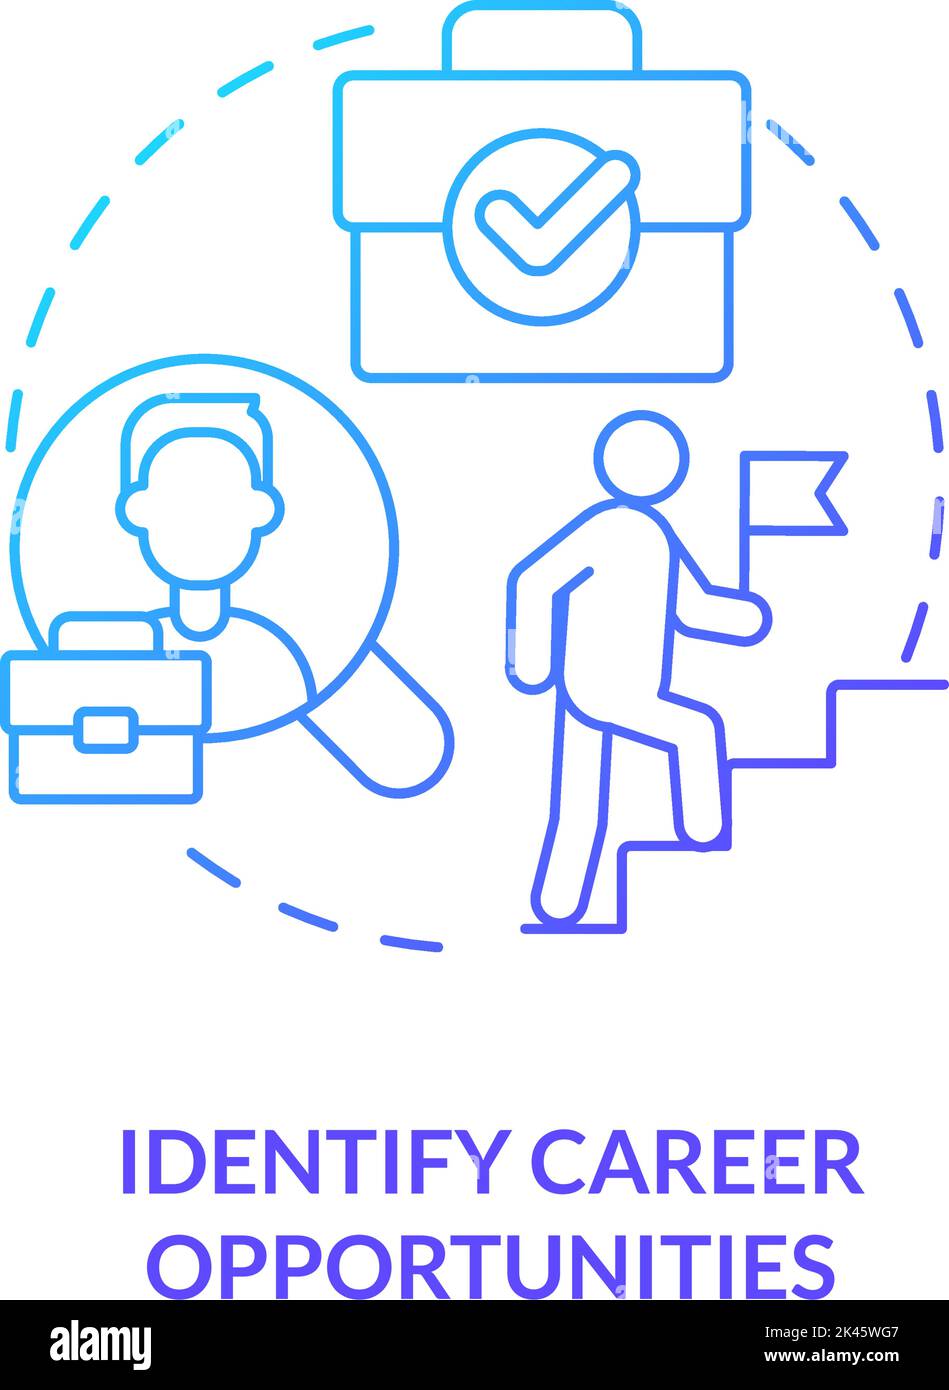 Identify career opportunities blue gradient concept icon Stock Vector